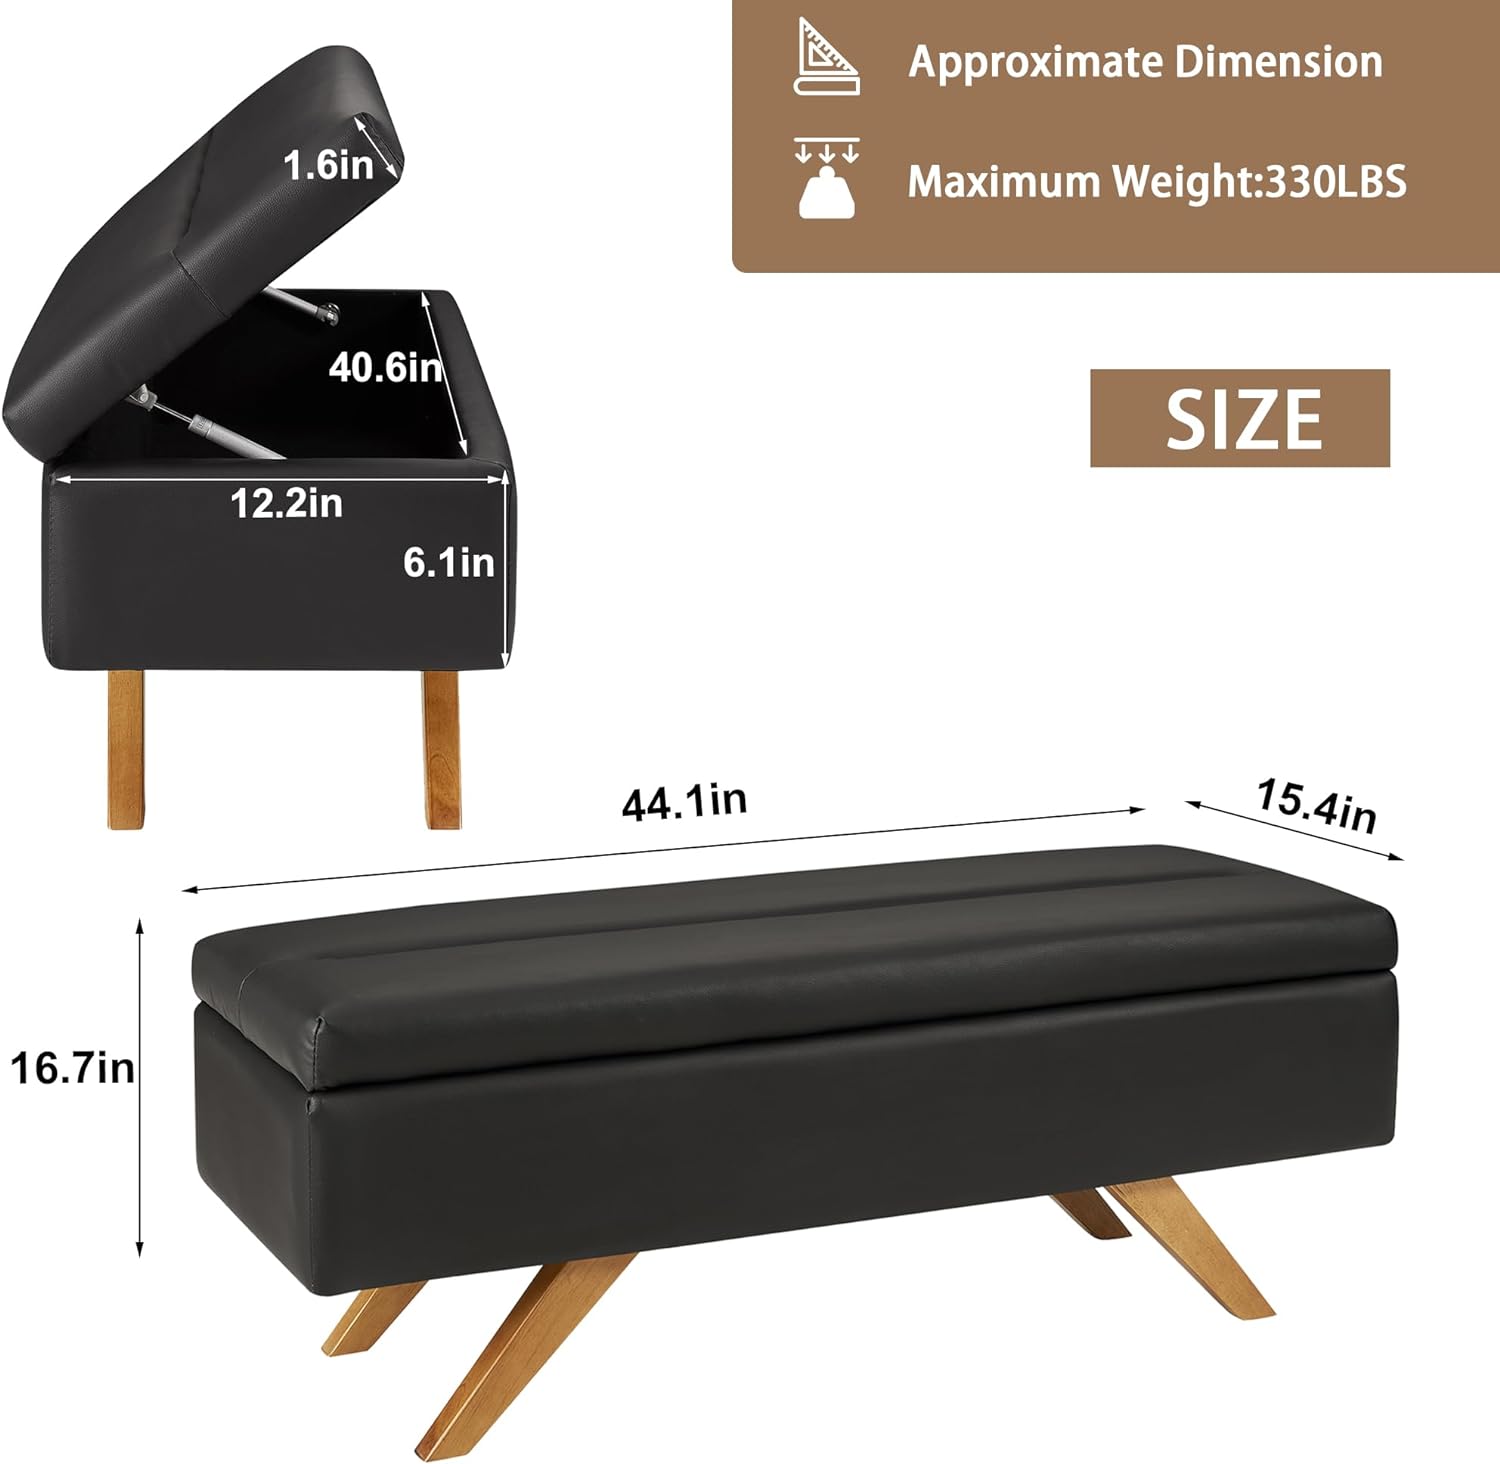 VECELO PU Leather Ottoman Bench with 6.1-inch Storage Space